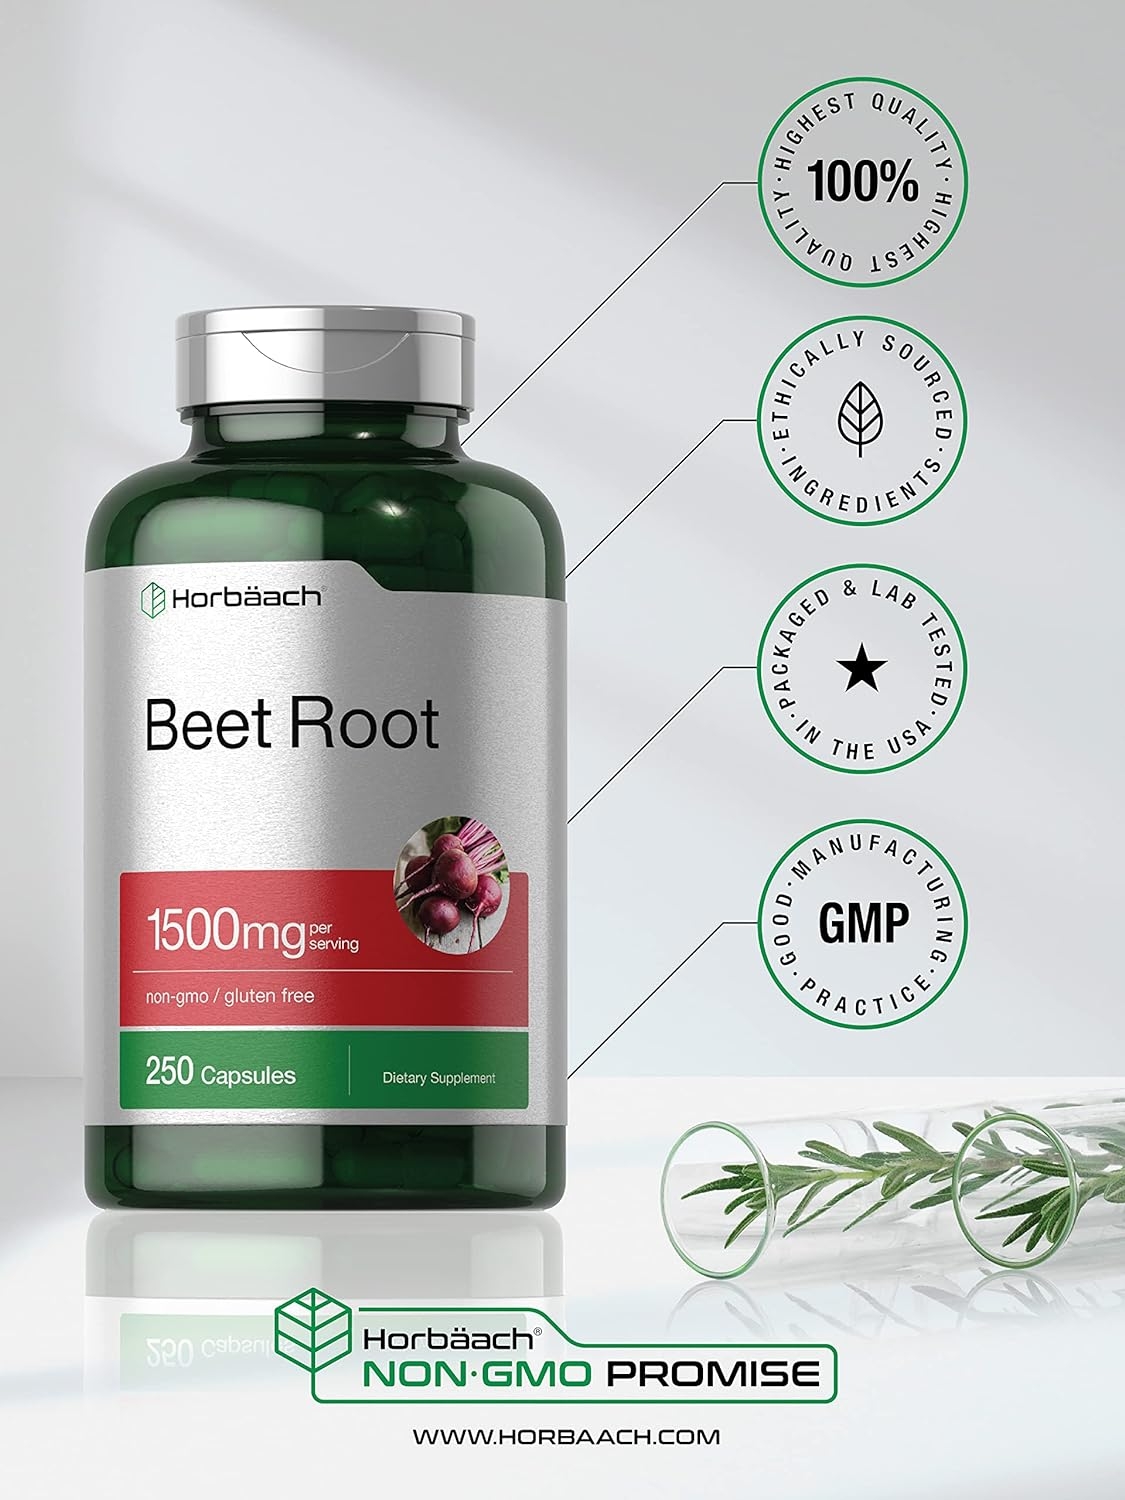 Beet Root Powder Capsules 1500mg | 250 Pills | Herbal Extract | Non-GMO, Gluten Free, and DNA Tested Supplement | by Horbaach